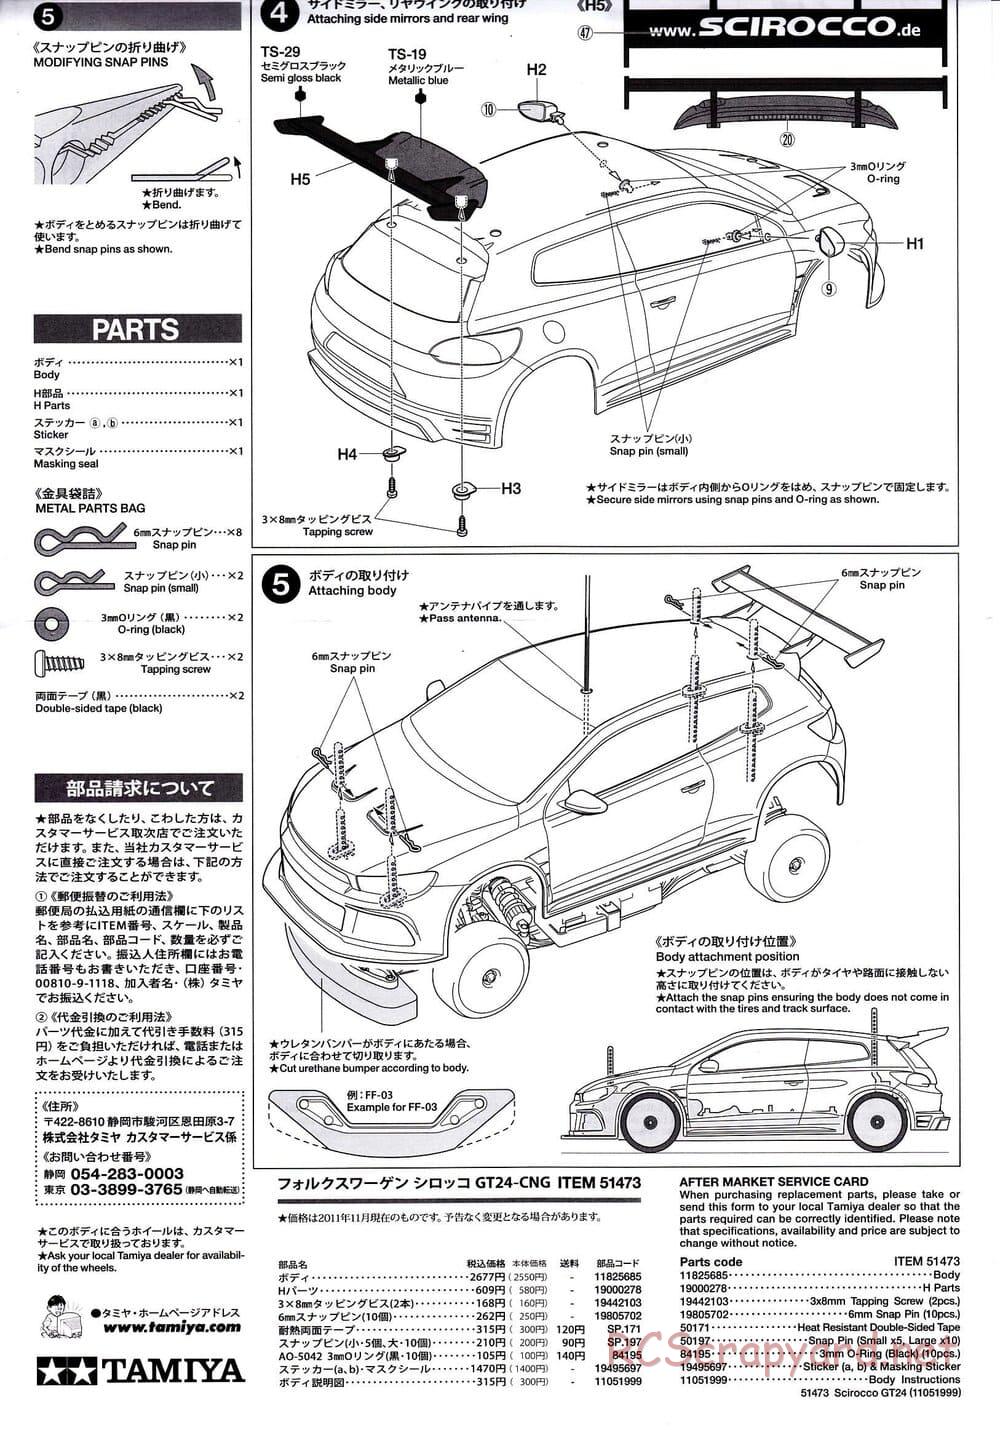 Tamiya - Volkswagen Scirocco GT24-CNG - FF-03 Chassis - Body Manual - Page 4